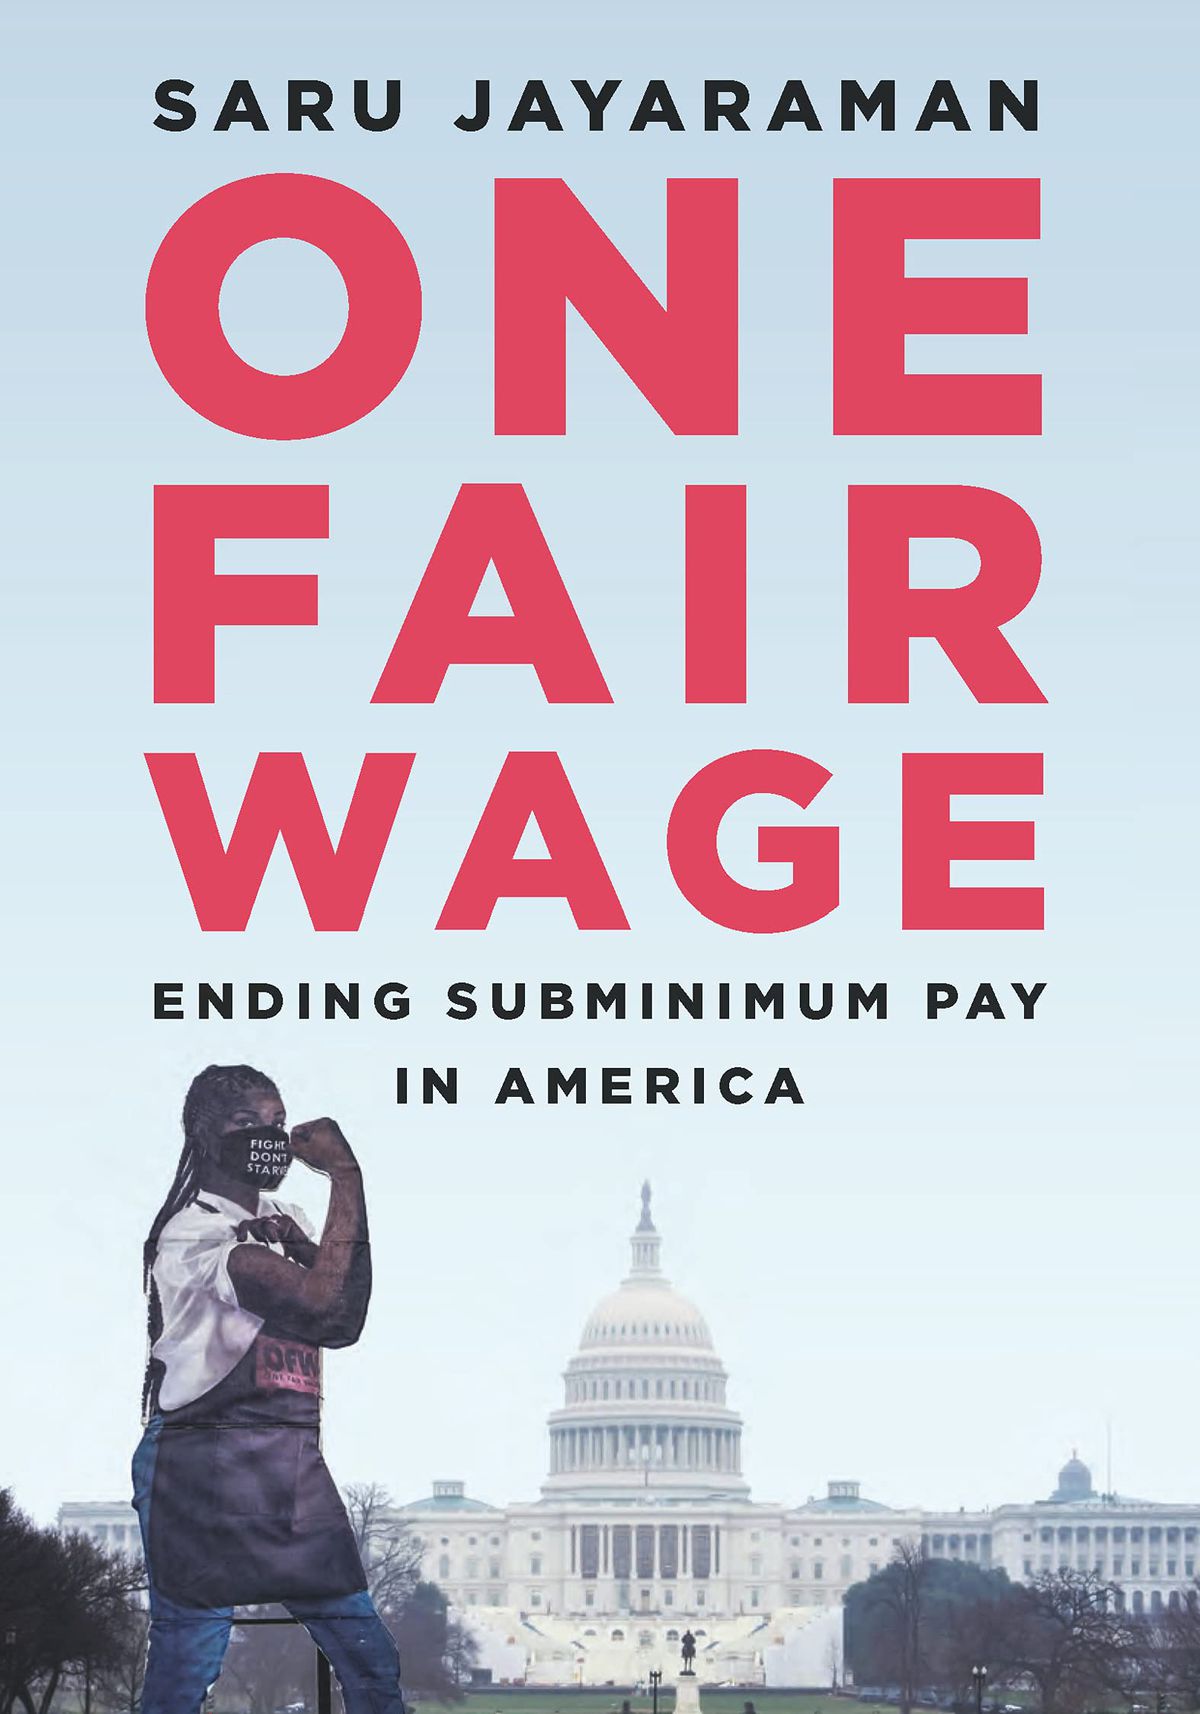 The book cover for “One Fair Wage”